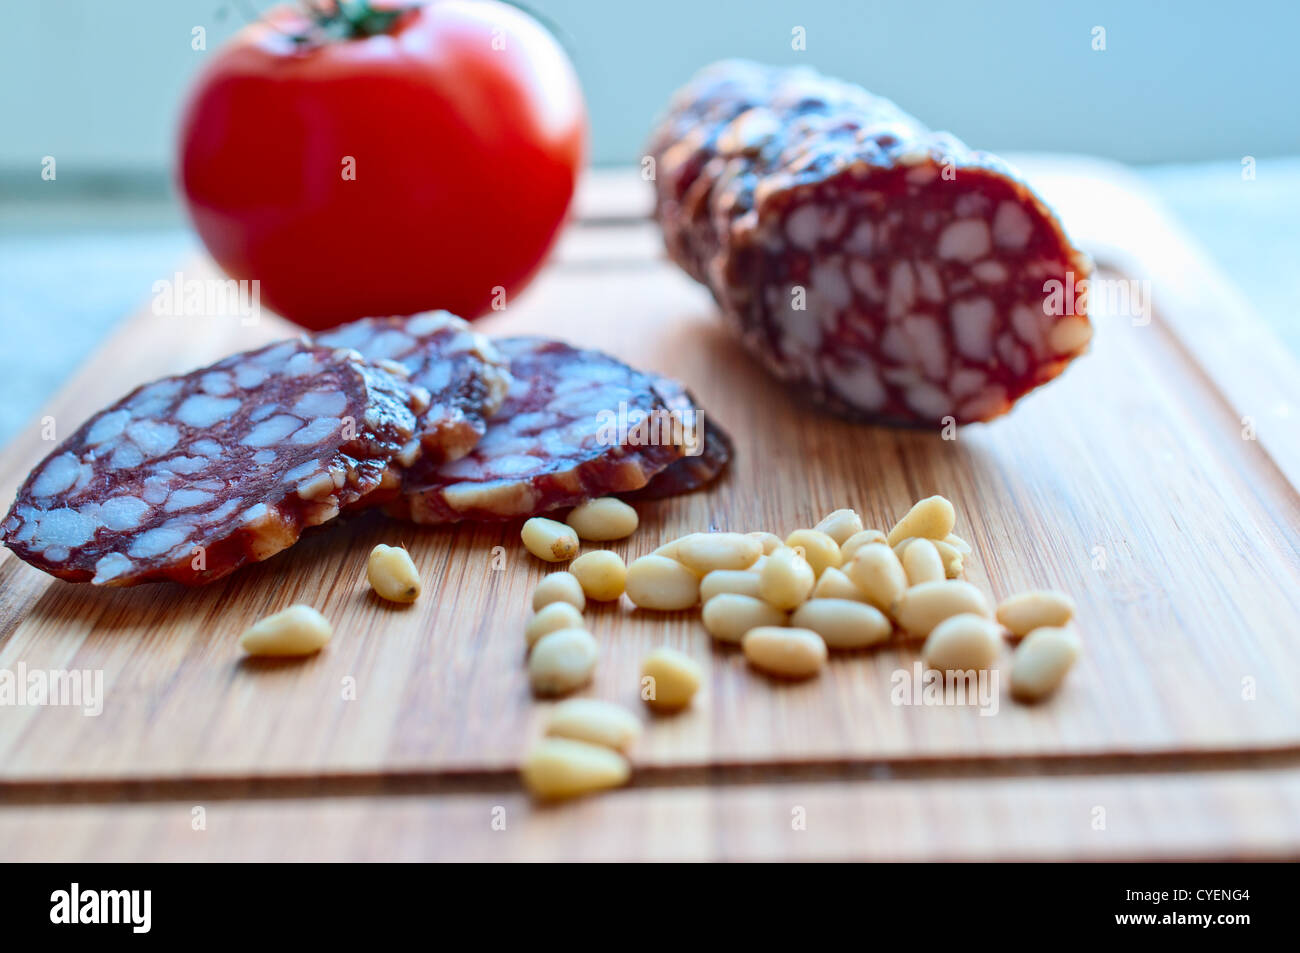 Sausage, tomato, pine nuts on  wooden board close up Stock Photo